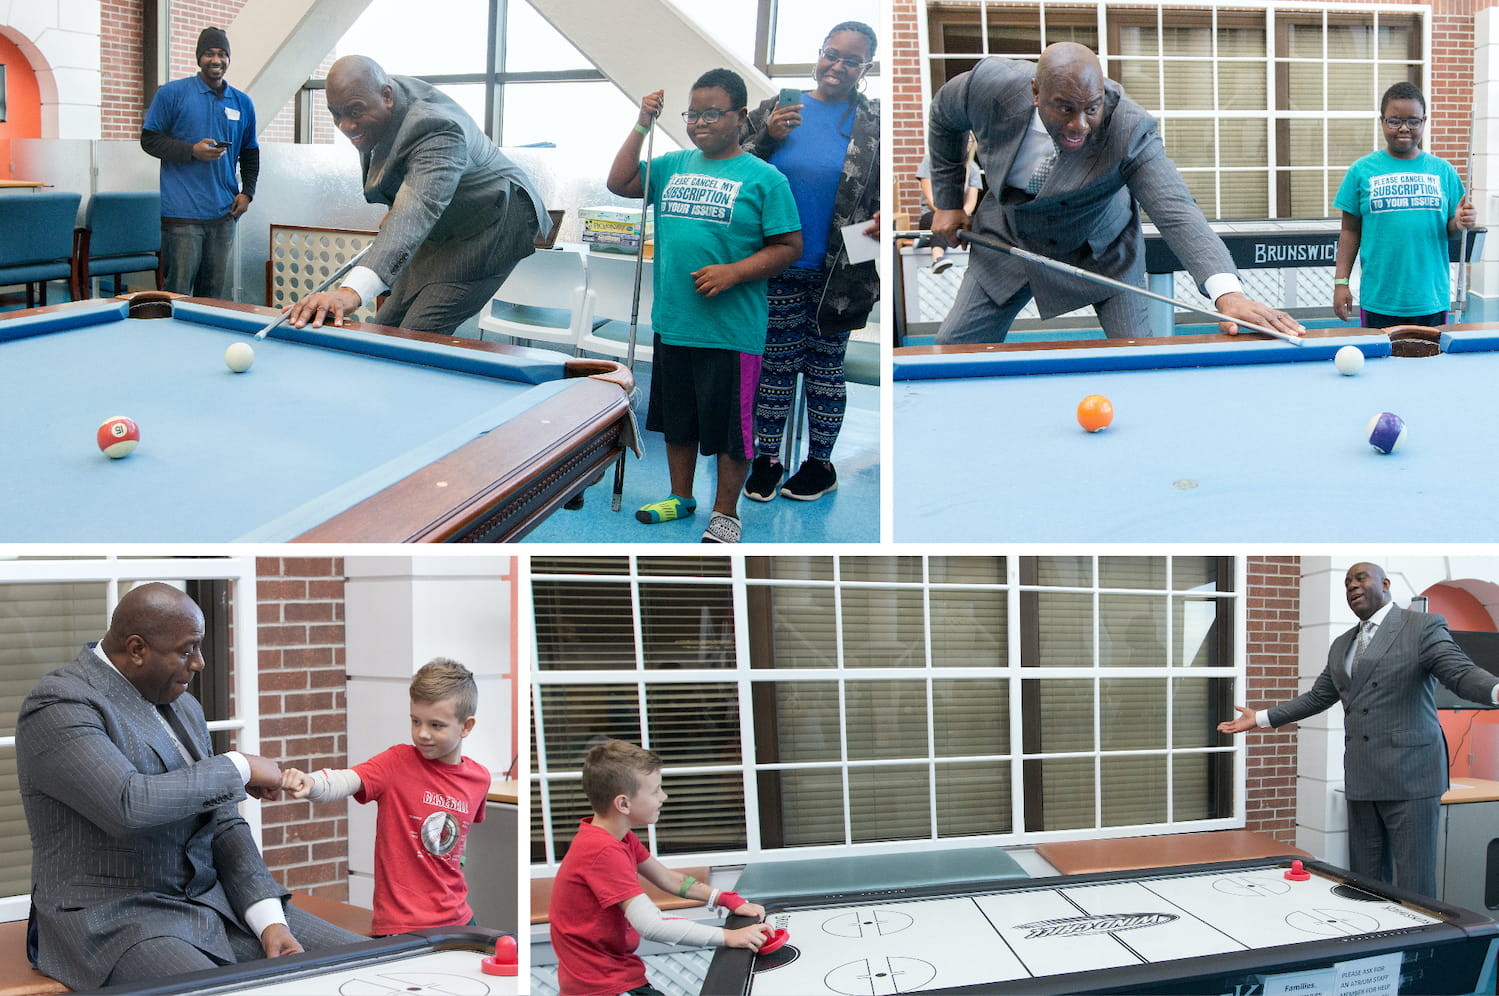 Magic Johnson played air hockey, shot pool and hung out with dozens of kids in the MUSC Children's Hospital